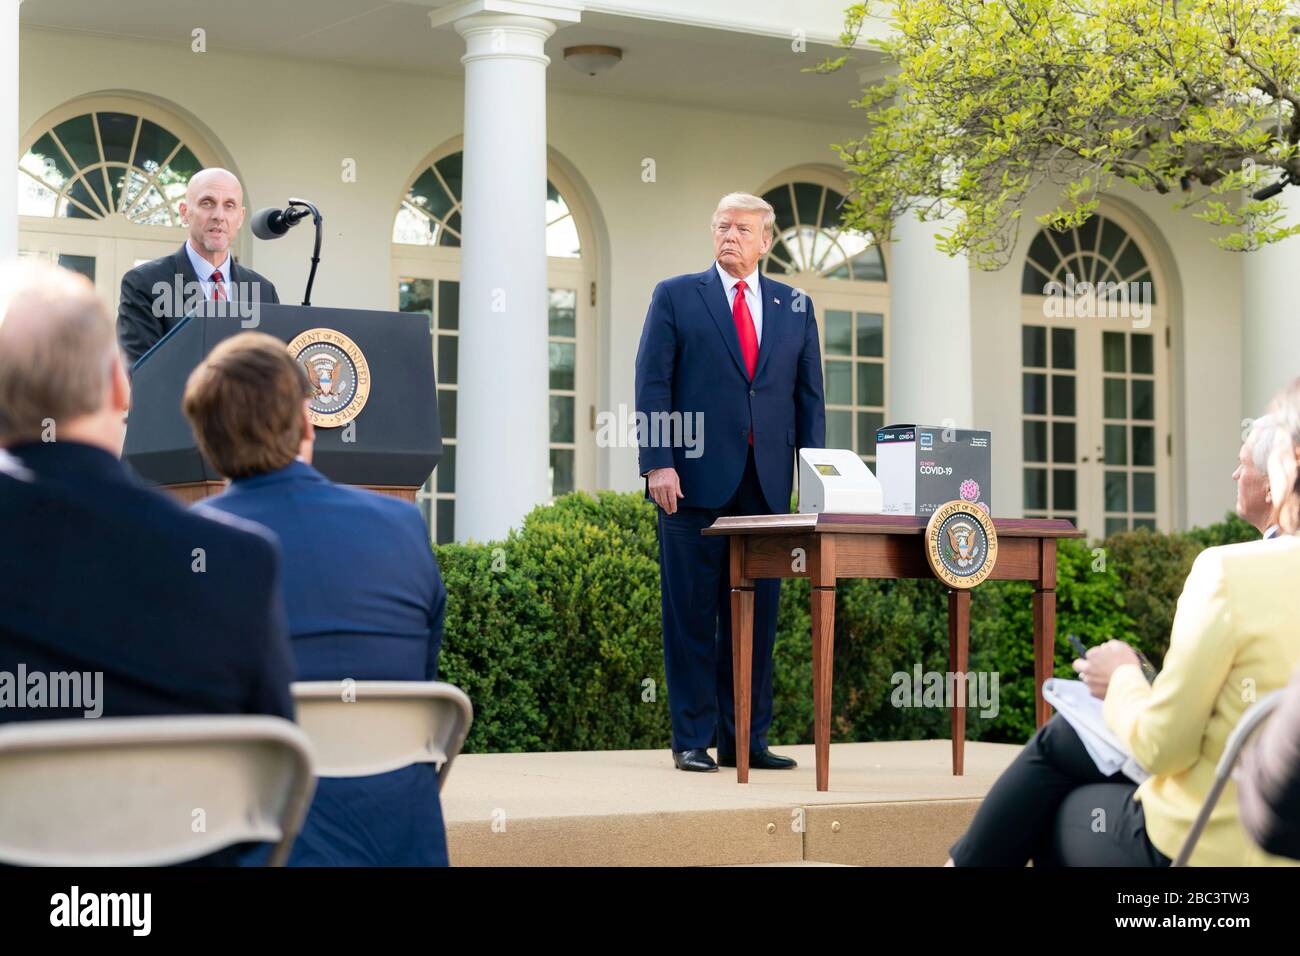 U.S President Donald Trump listens as Dr. Stephen Hahn, Commissioner of the Food and Drug Administration, delivers remarks at the daily COVID-19, coronavirus briefing in the Rose Garden of the White House March 30, 2020 in Washington, DC. Stock Photo